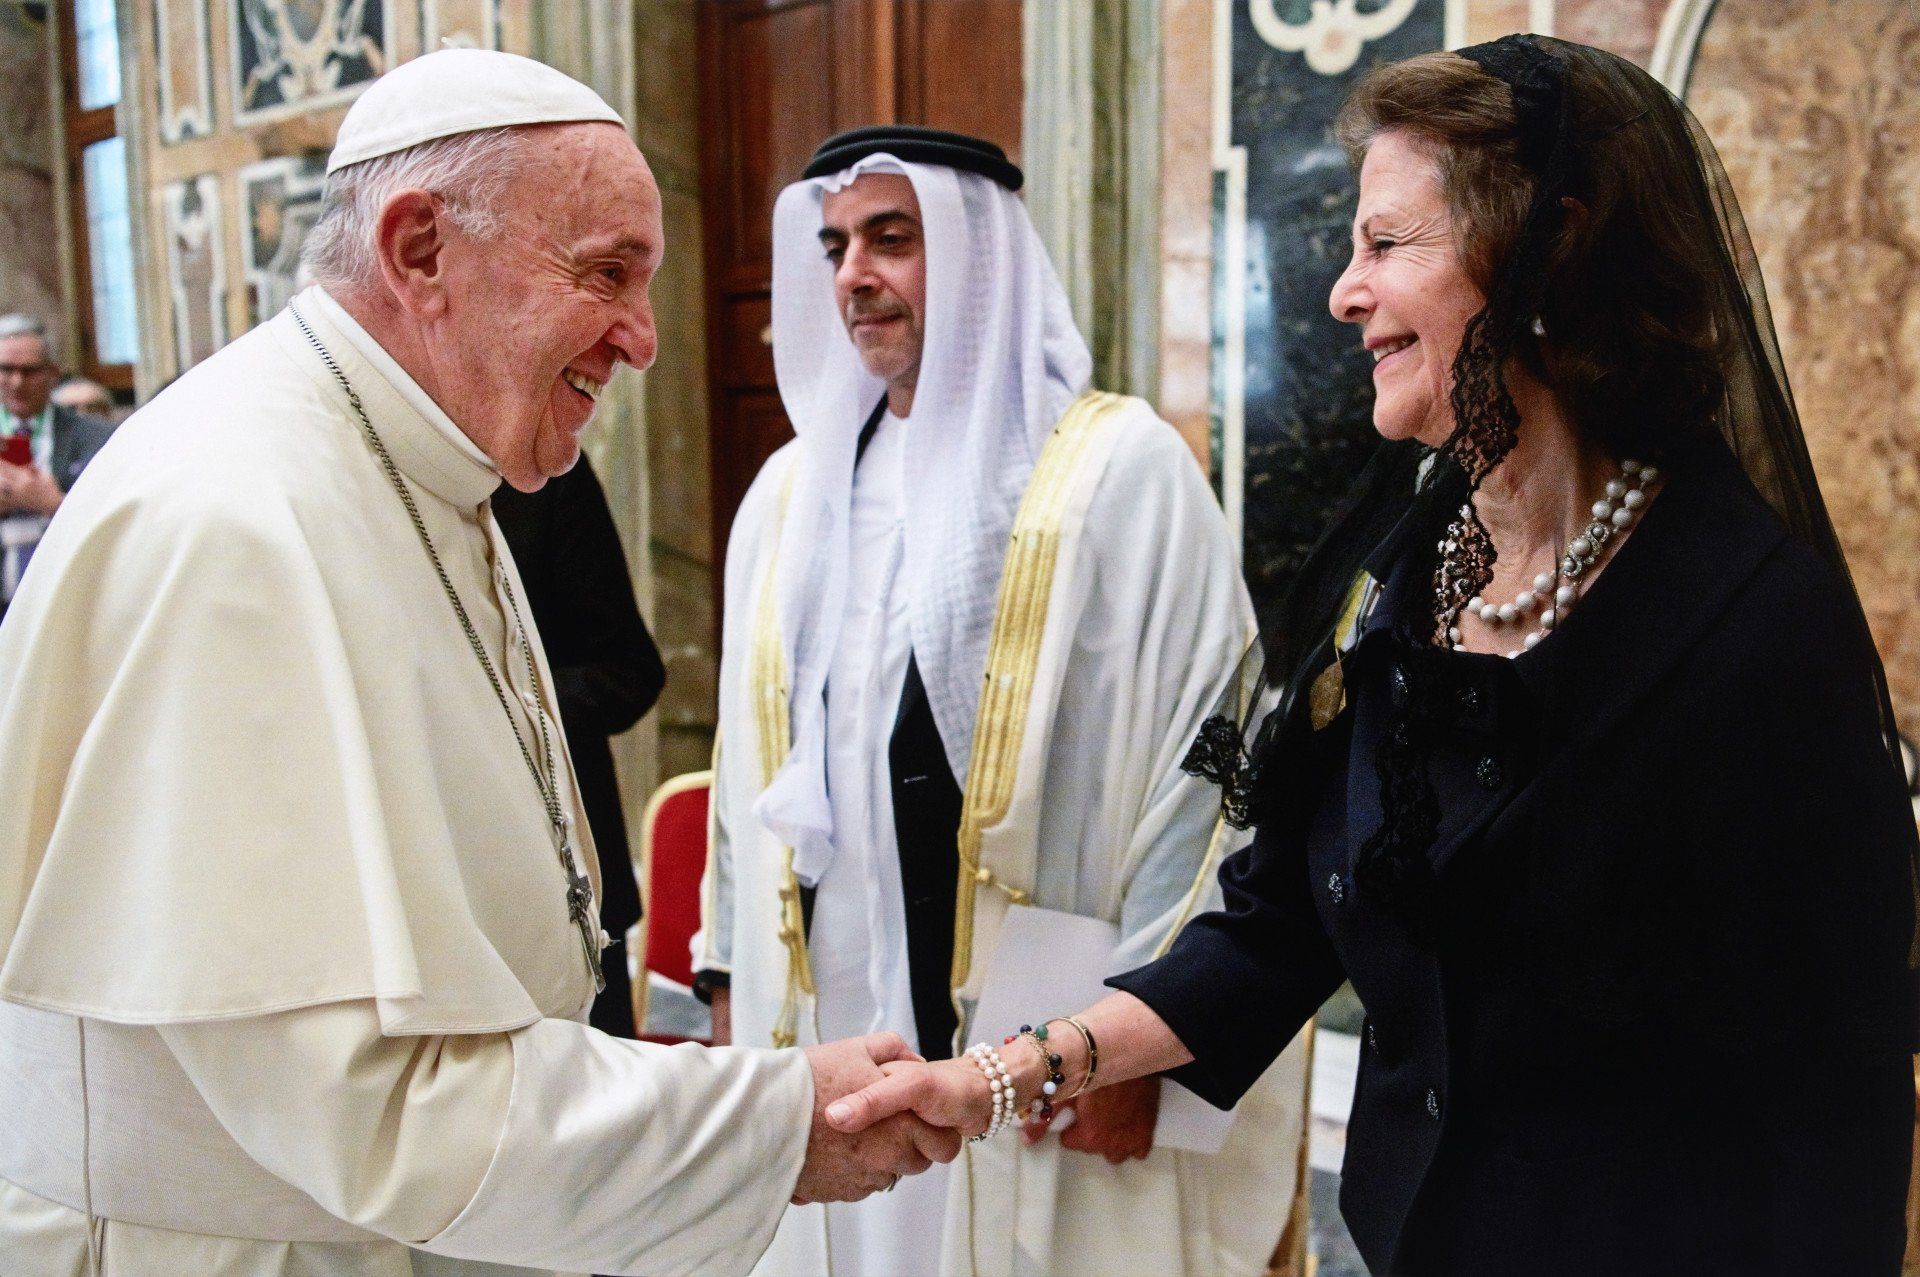 The pope and a women wearing all black shacking hands and smiling 